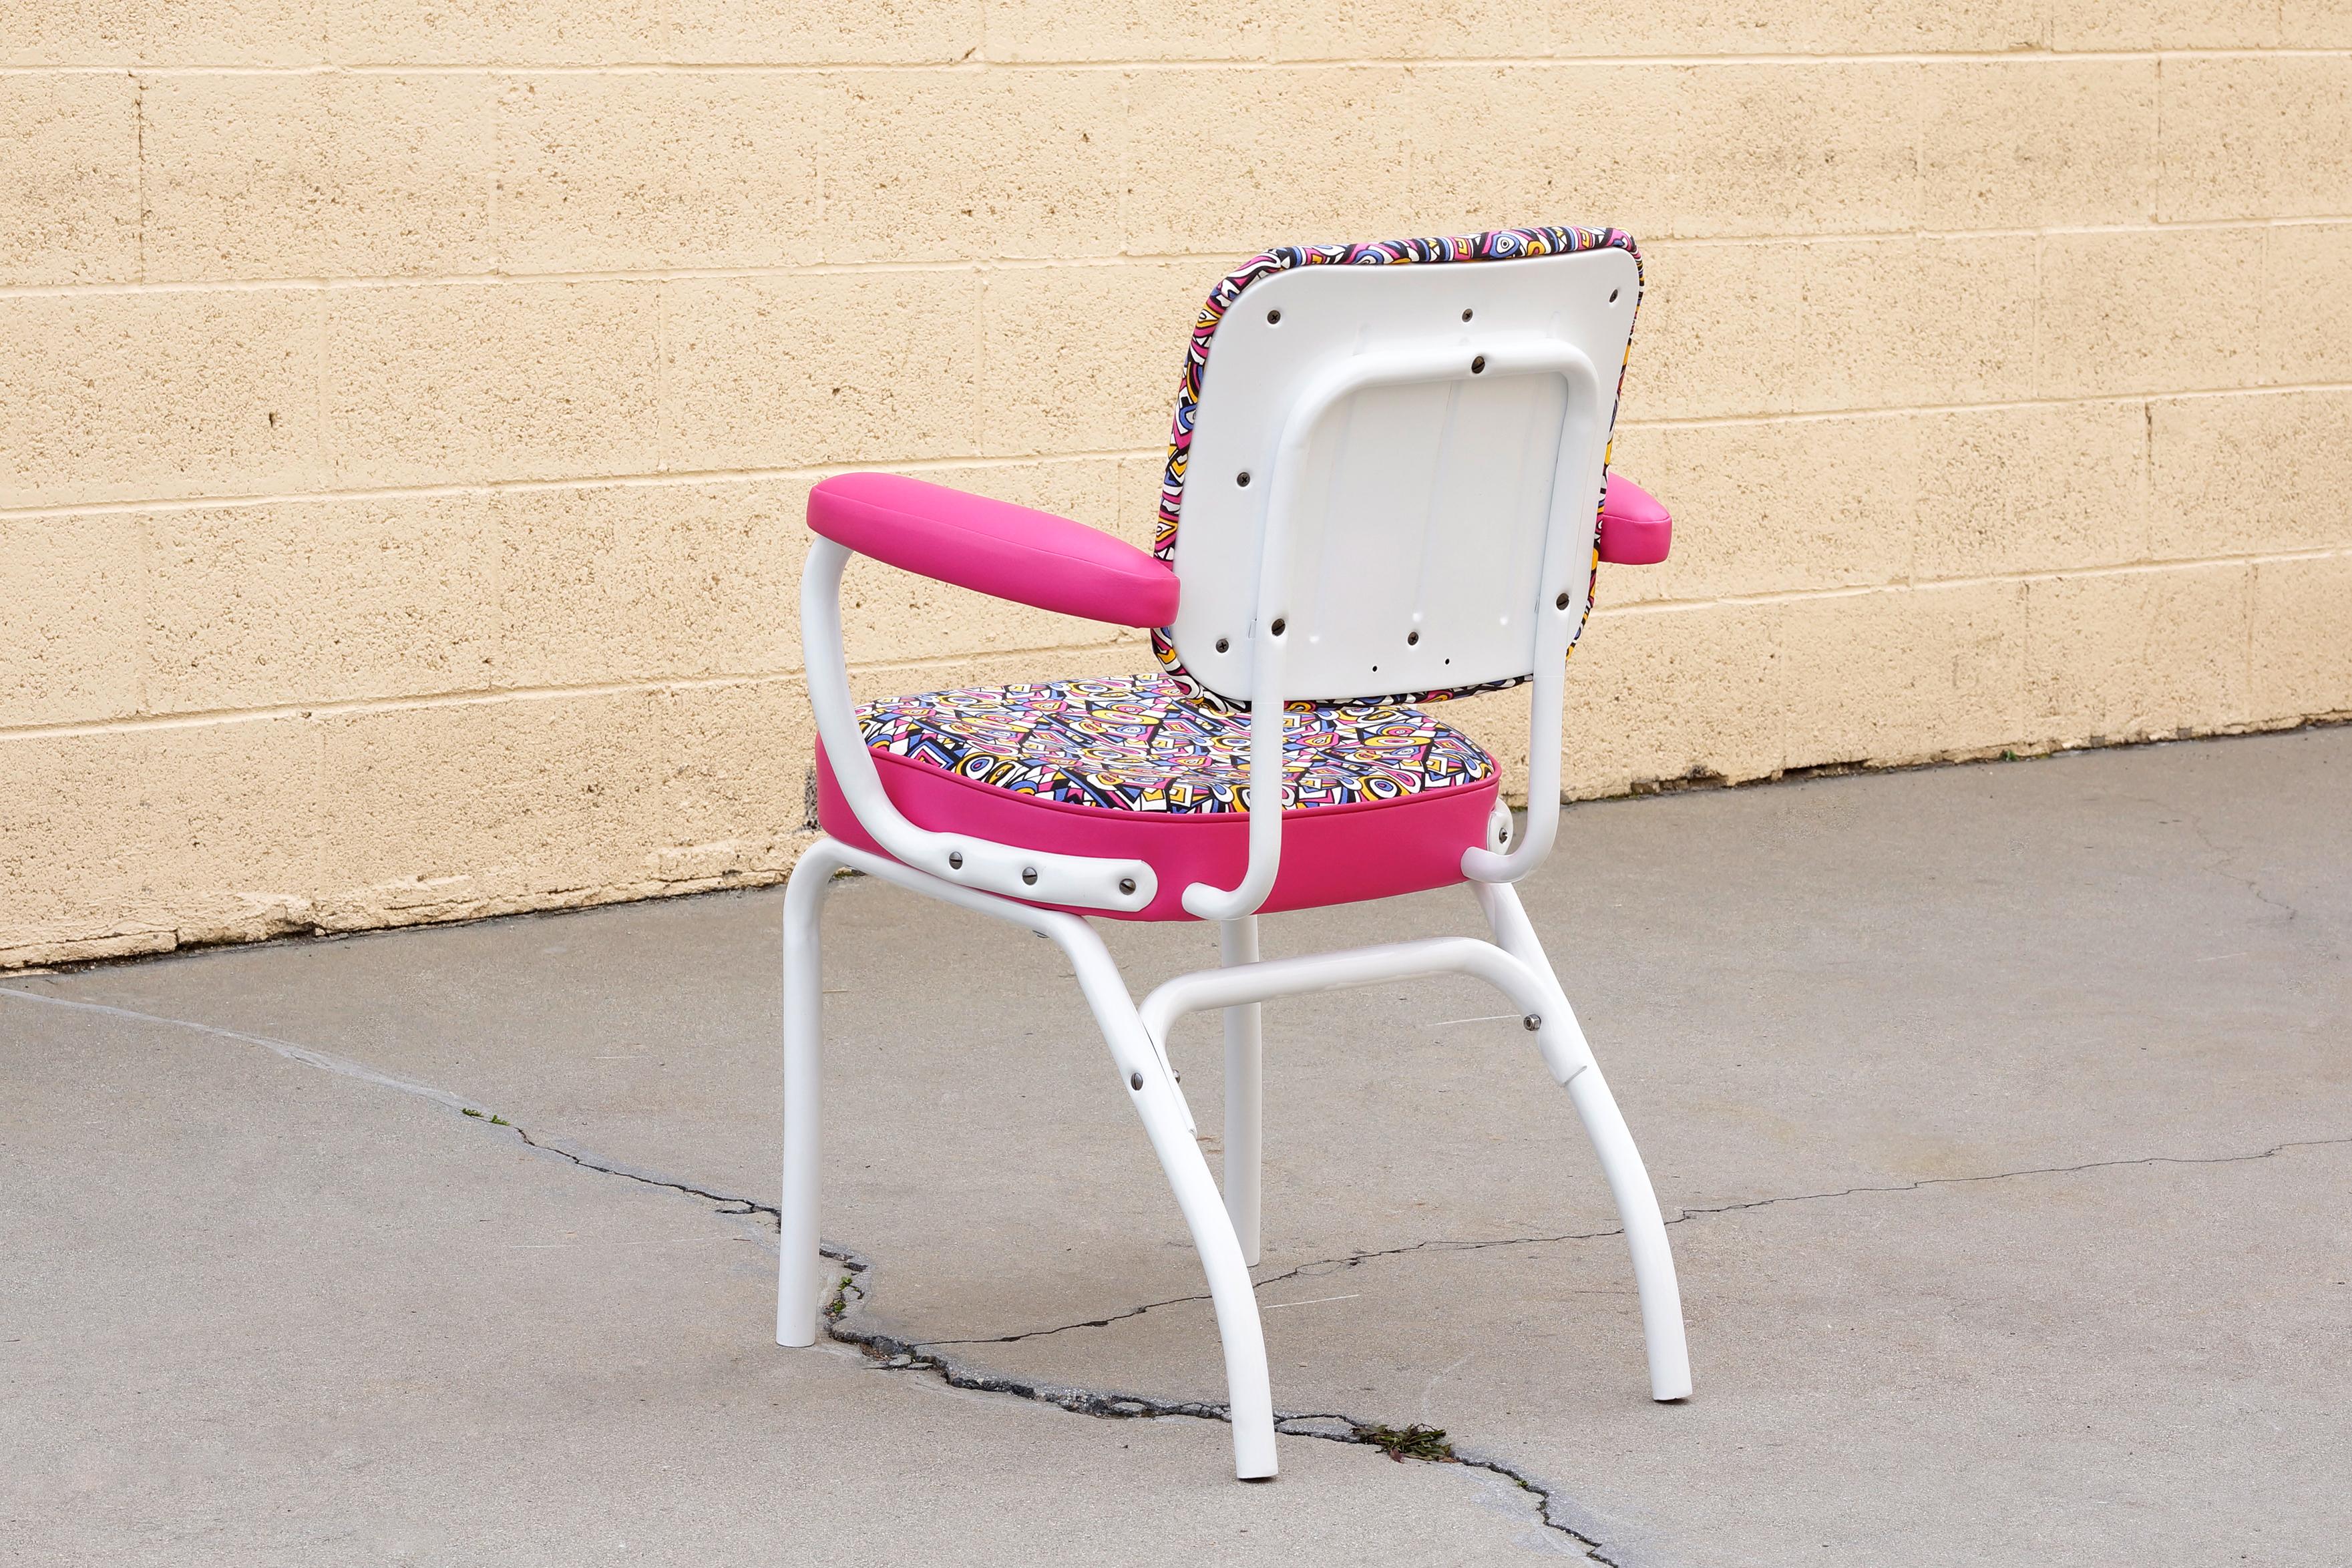 Uber cool 1950s Cosco armchair. We refinished the frame in a gloss white powder coat and upholstered the seat in a retro style fabric with pink vinyl arms. You'll be sitting pretty in pink!

Dimensions: 24